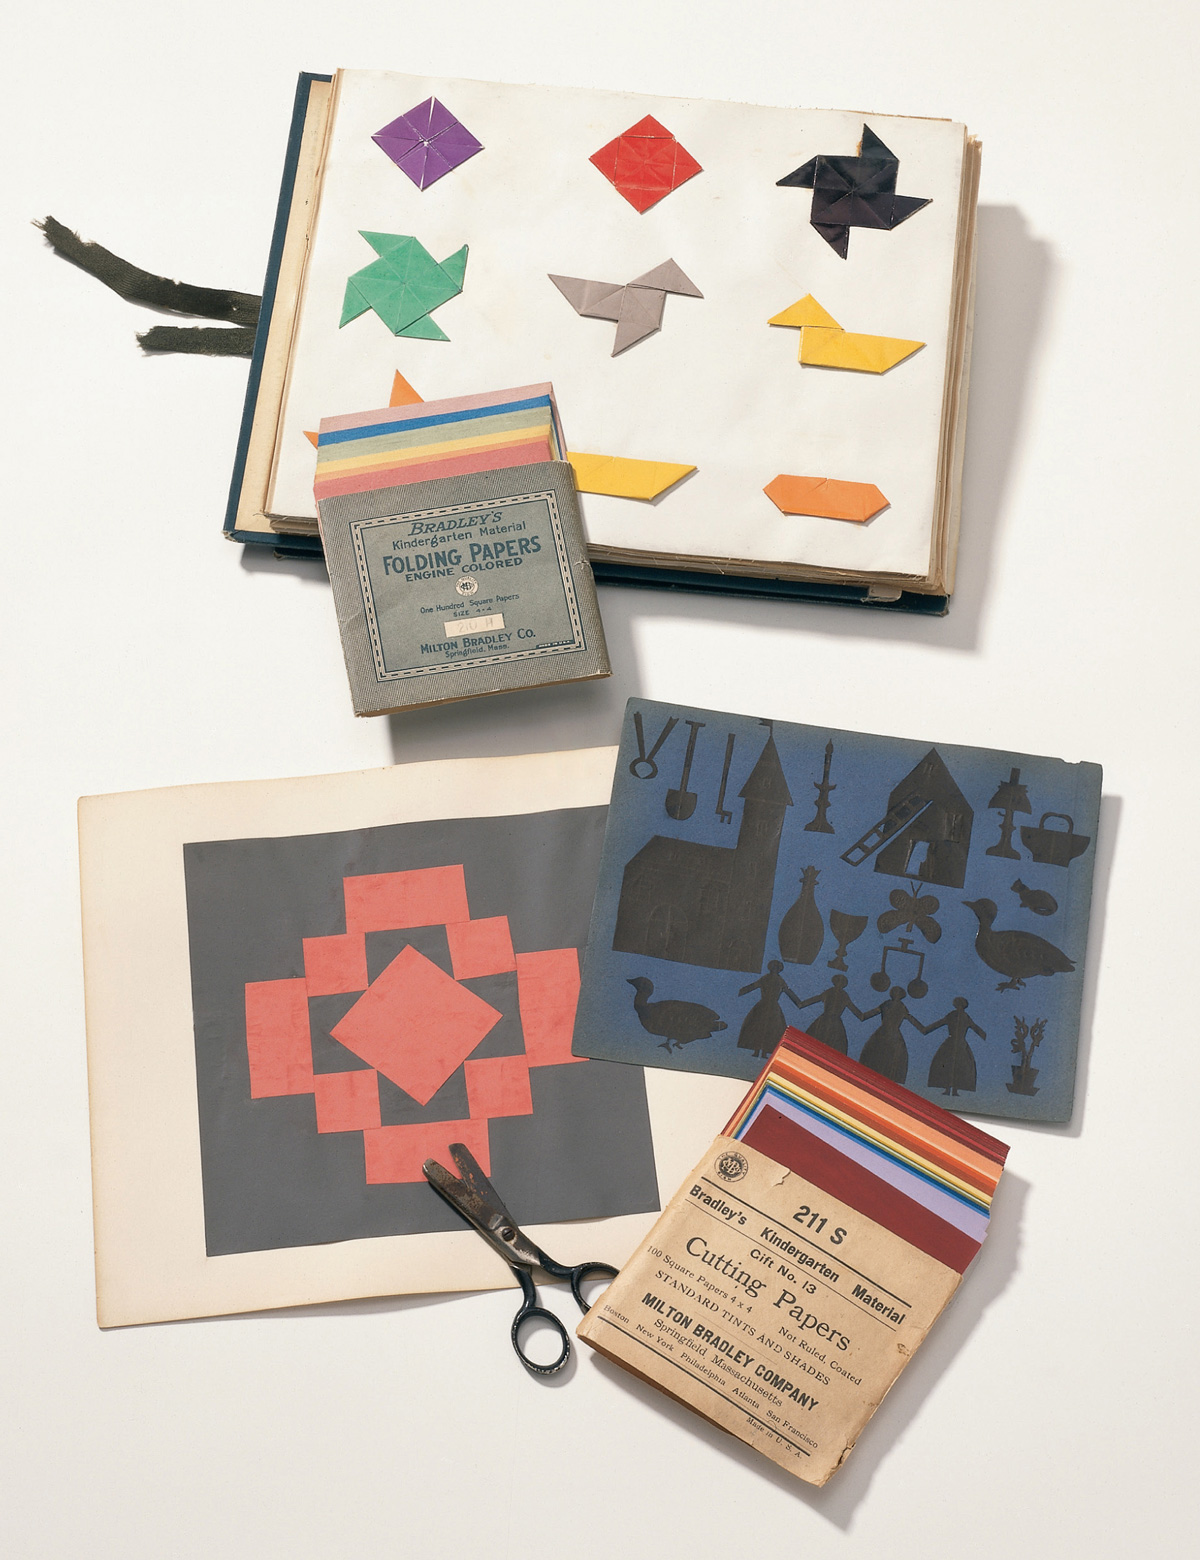 A photograph of various materials related to Friedrich Wilhelm Fröbel‘s pedagogical system. These include kindergartners’ and teachers‘ exercises made by folding and cutting paper.